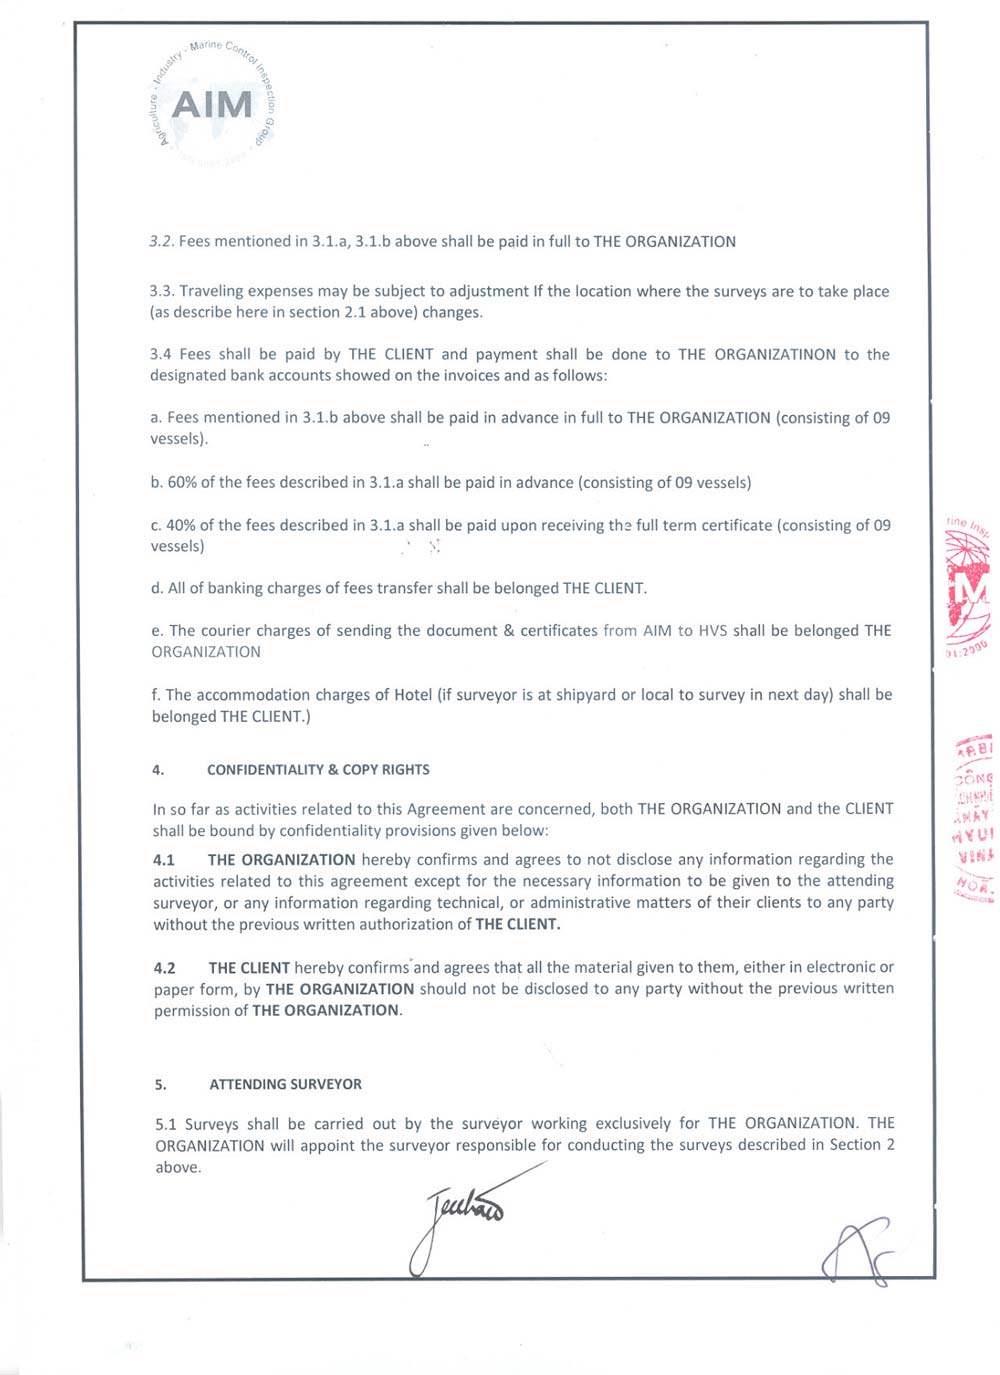 Agreement_of_Survey_Registration_for_Classification_2